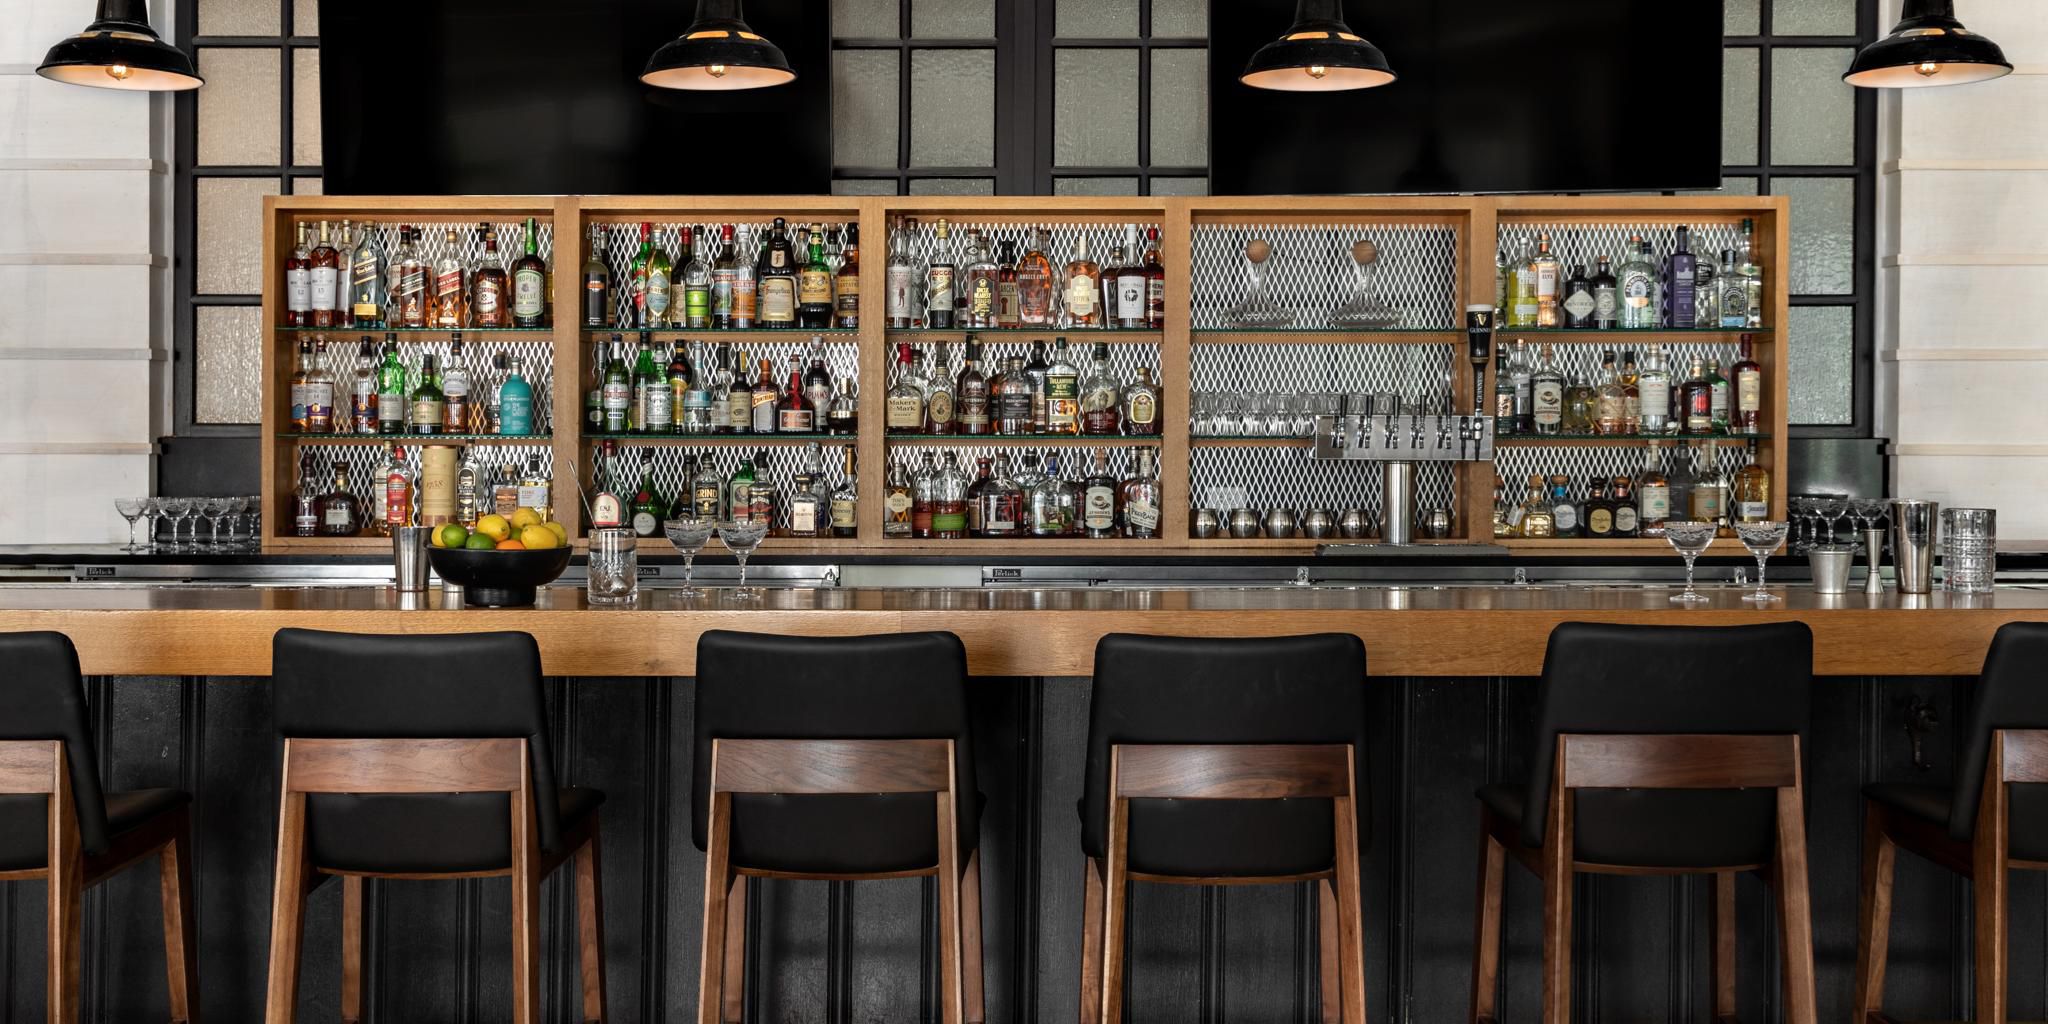 Pacci's Bar offers creative cocktails, regional wines, draft beers